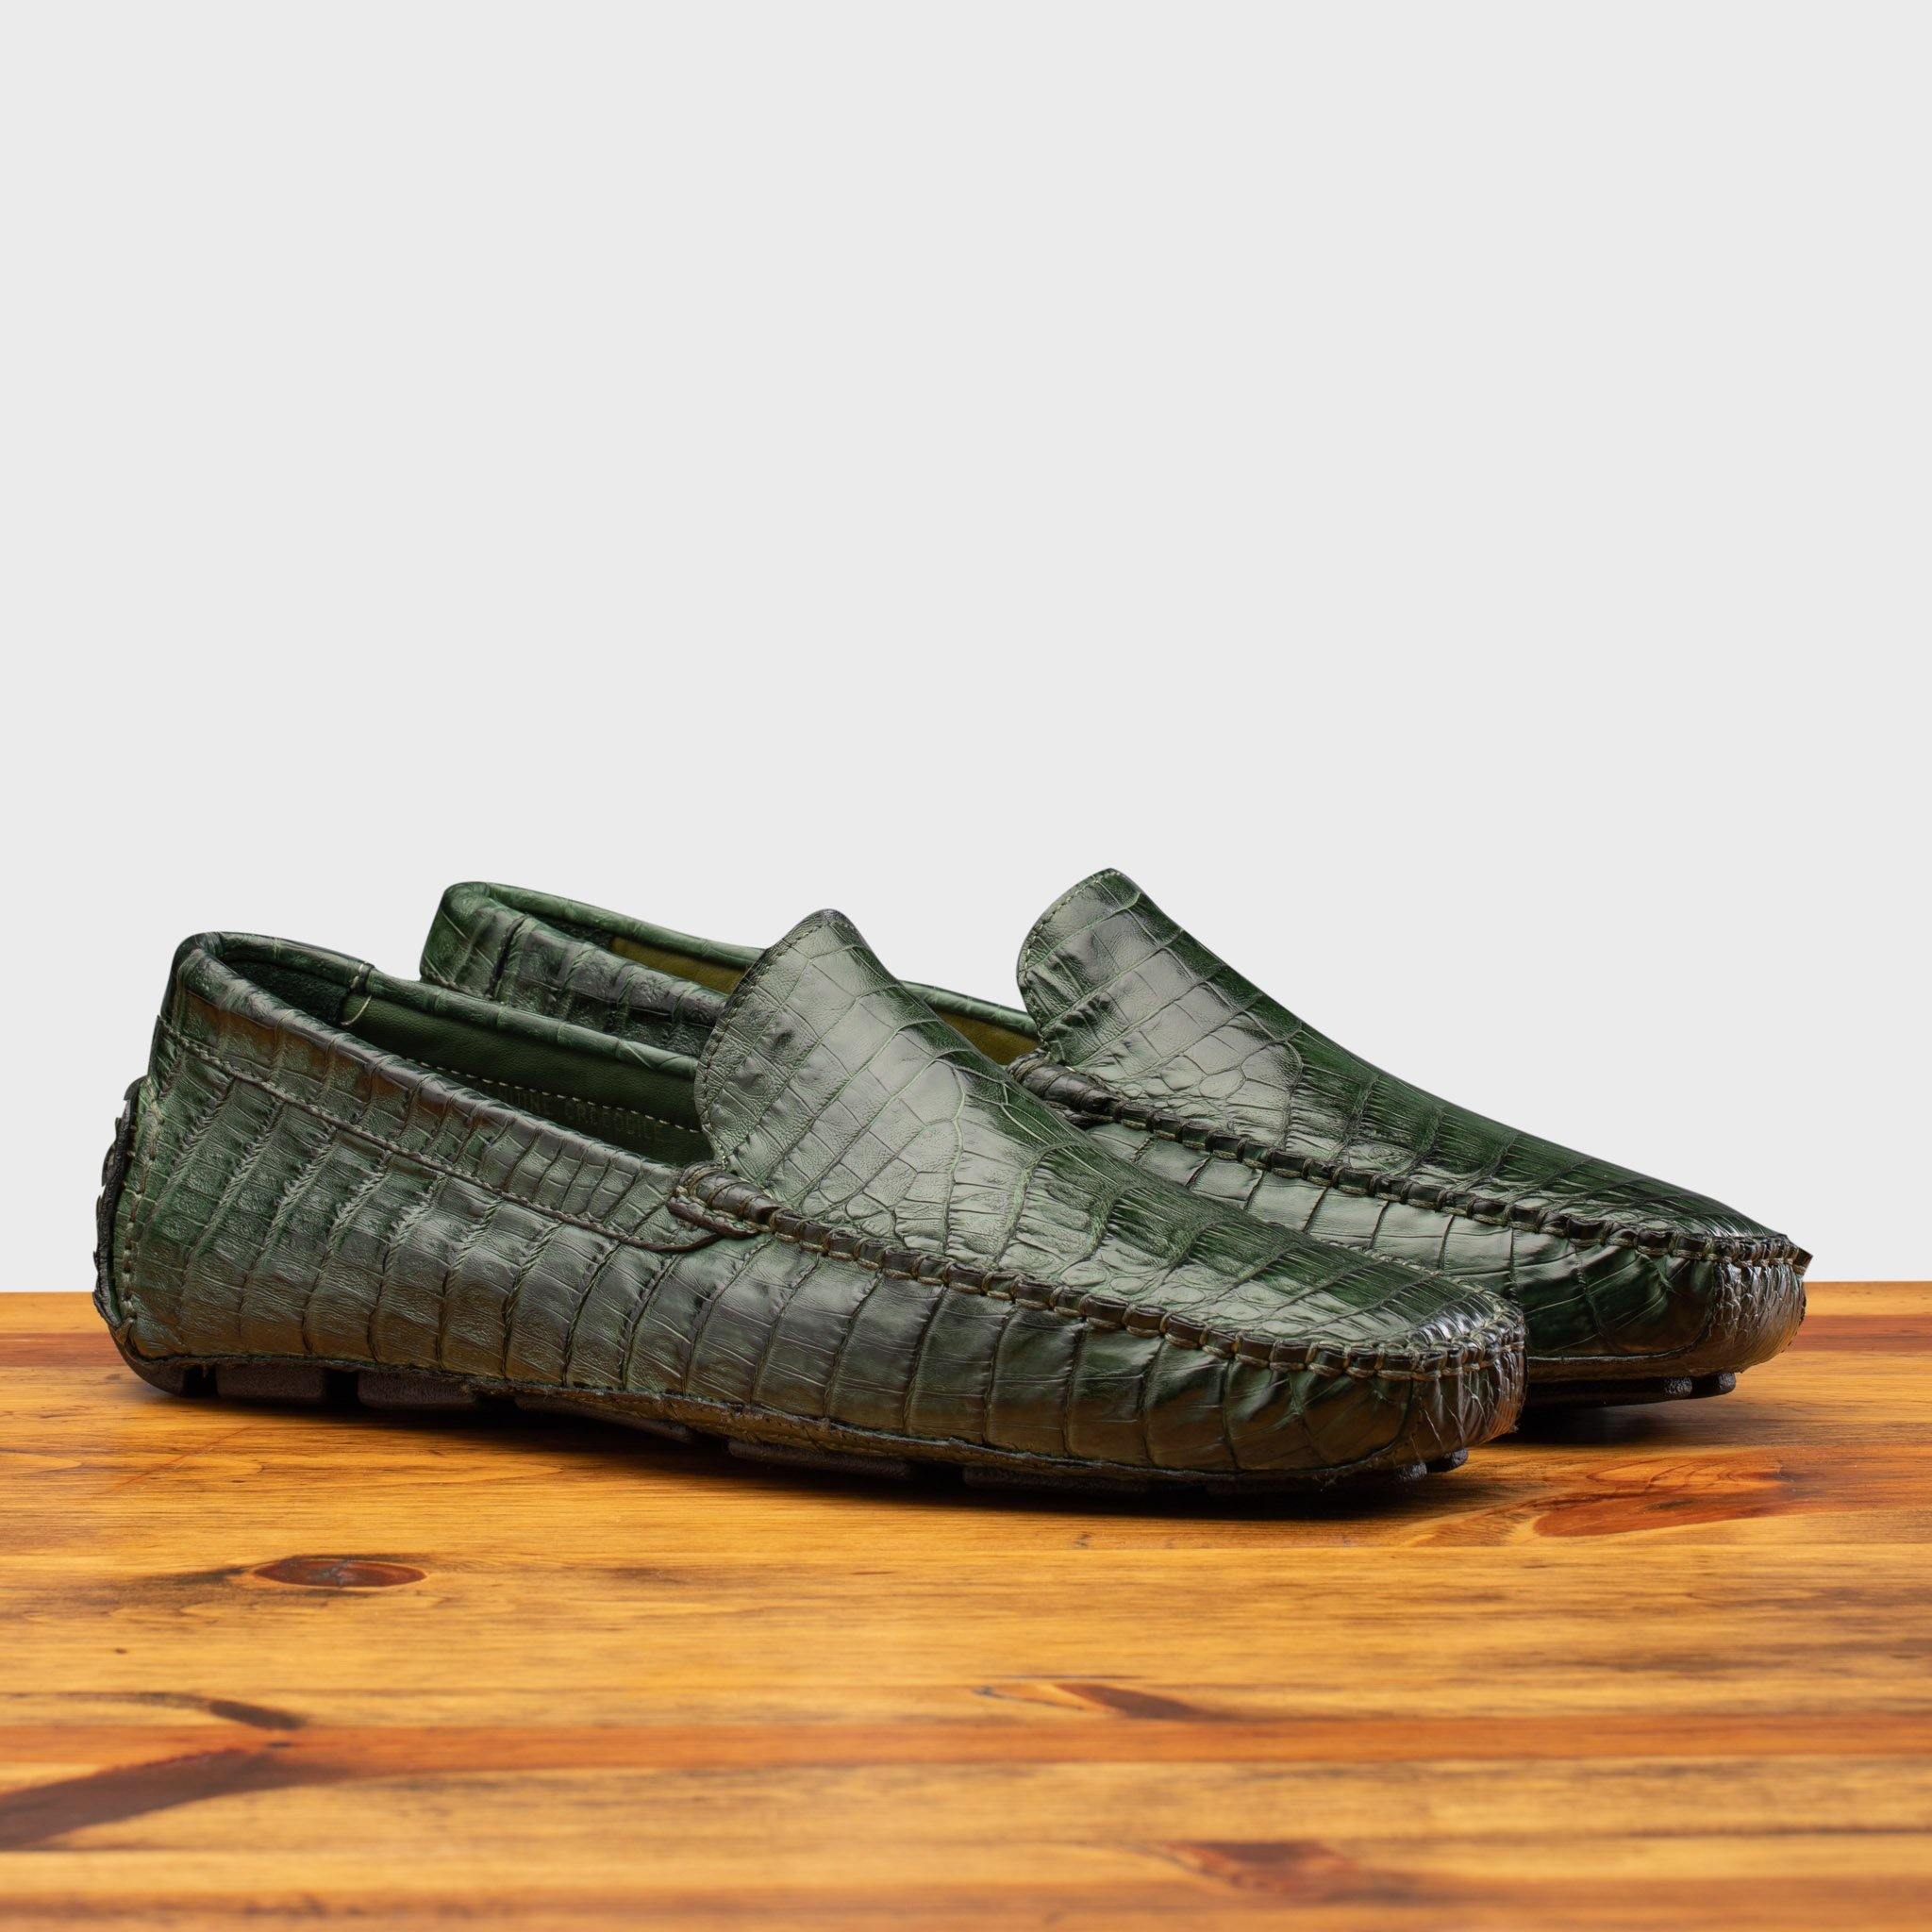 Pair of the 4551 Calzoleria Toscana Green Crocodile Dip-Dyed Driver on top of a wooden table